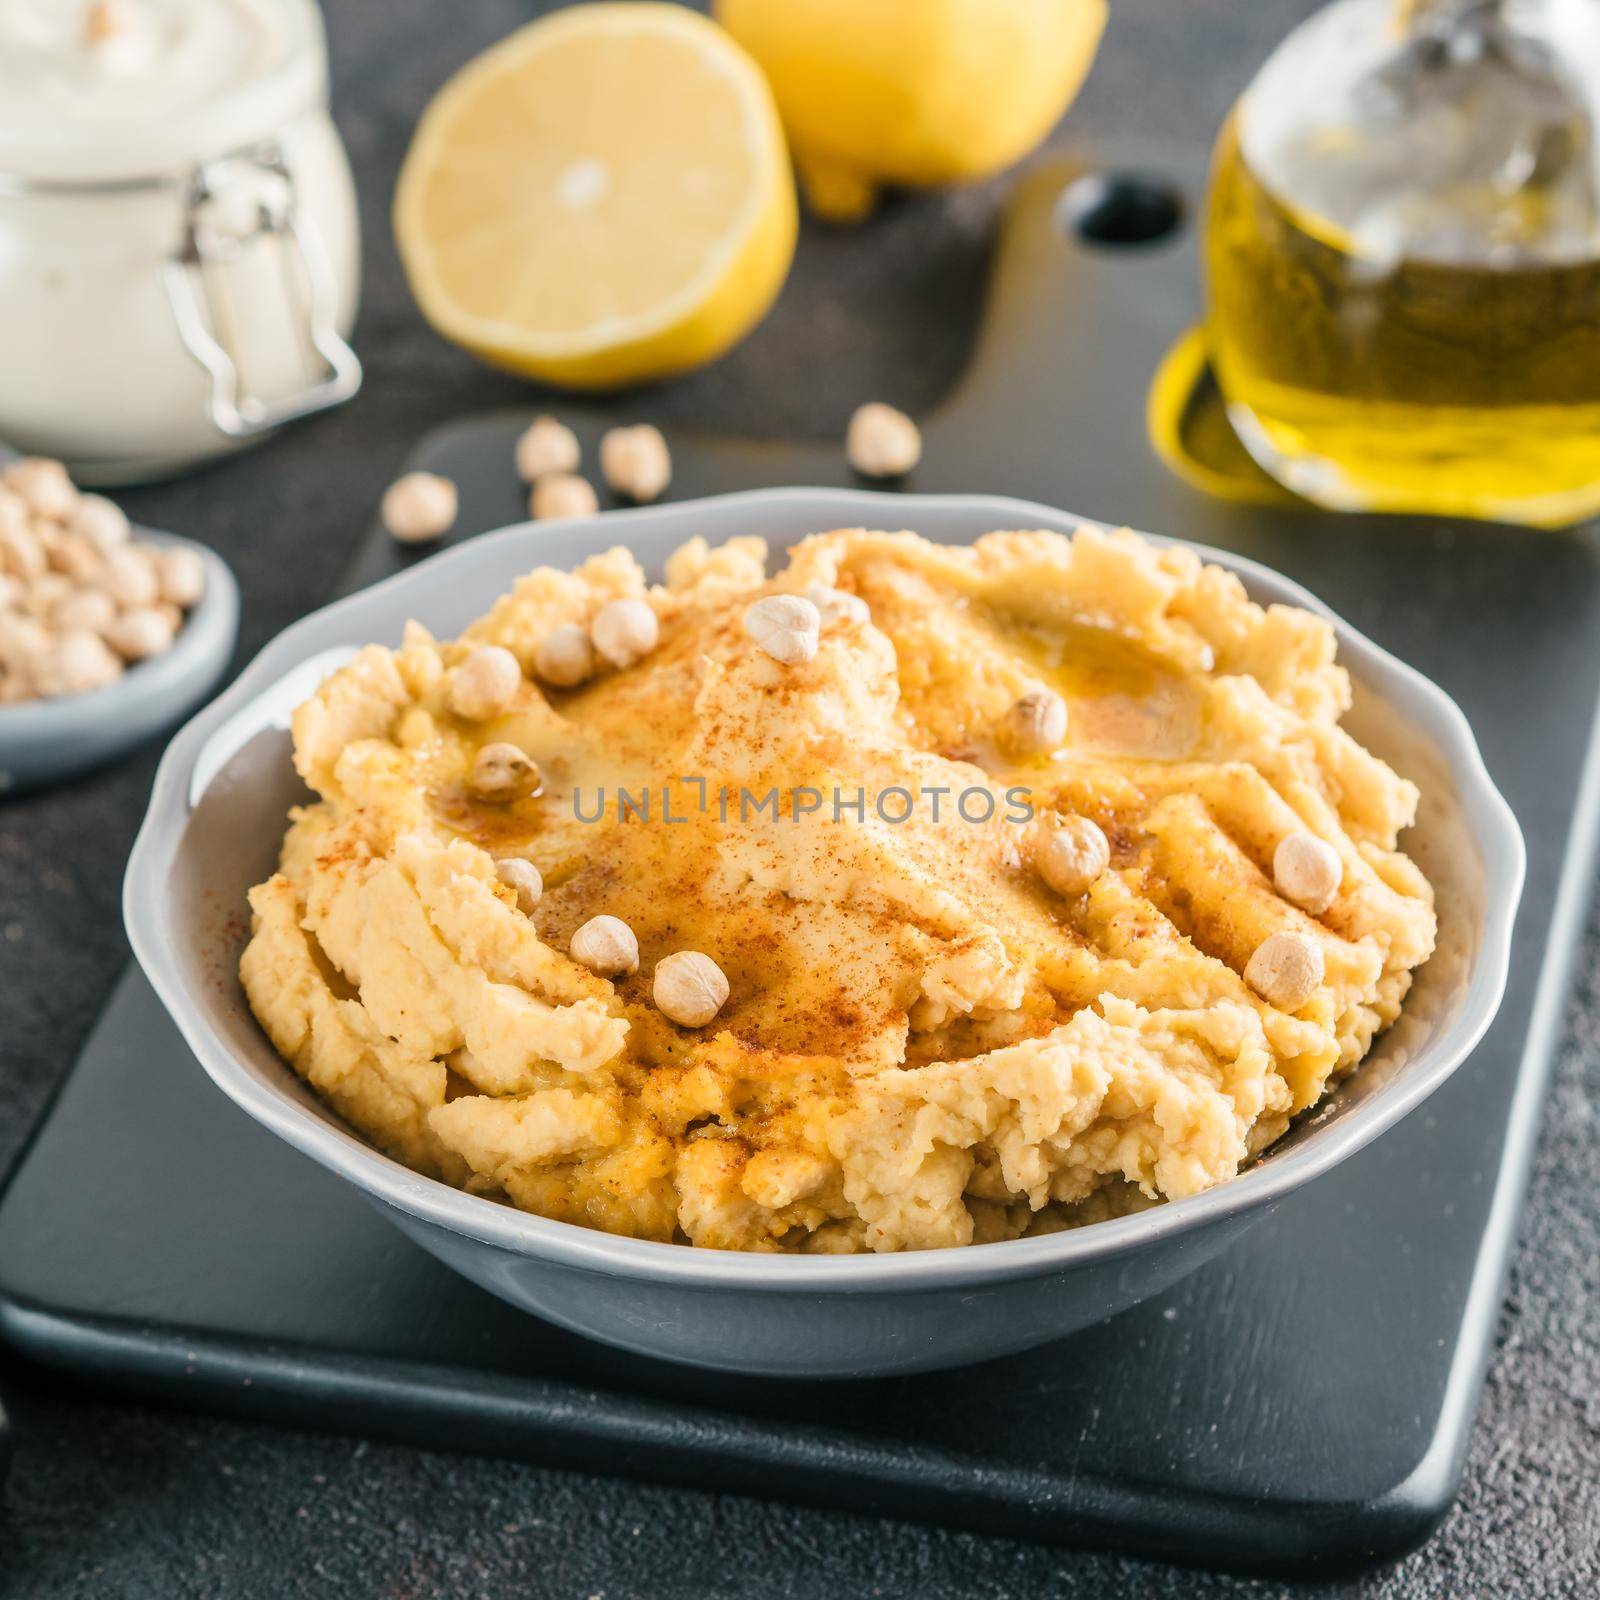 Homemade hummus with olive oil in gray bowl and ingredients. Traditional middle eastern appetizer hummus on gray background - healthy vegan paste snack. Vegetarian diet,nutrition protein food concept